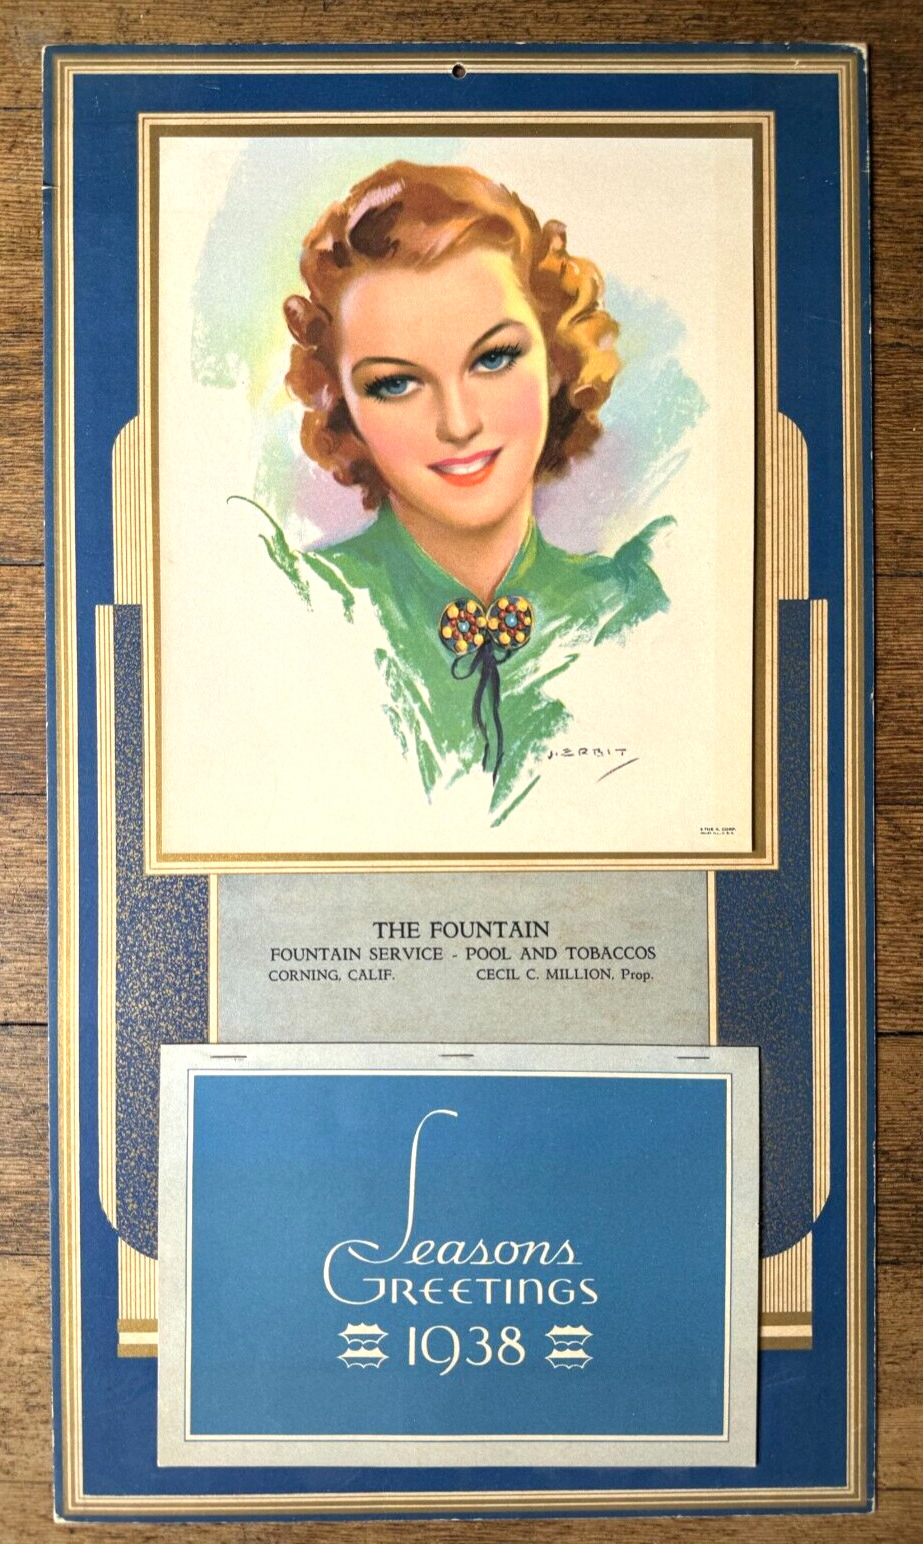 Amazing 1938 Pinup Girl Advertising Calendar by Erbit- Near Mint Condition